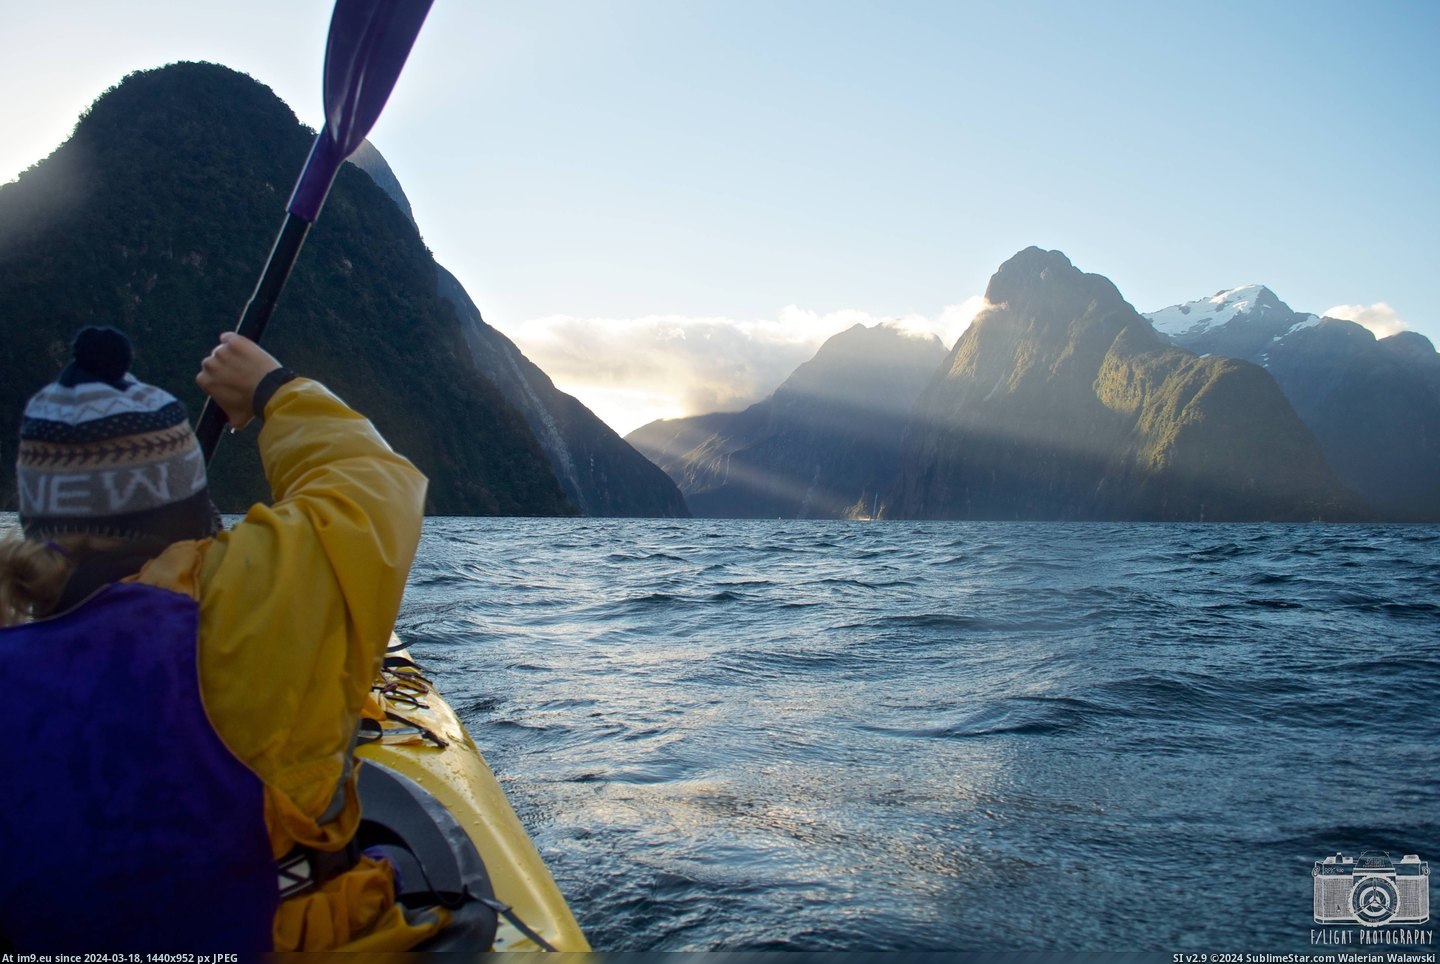 #Park #National #Zealand #Milford #Kayaking #Sound #4288x2848 #Fiordland [Earthporn] Kayaking the Milford Sound, Fiordland National Park, New Zealand [4288x2848] [OC] Pic. (Изображение из альбом My r/EARTHPORN favs))